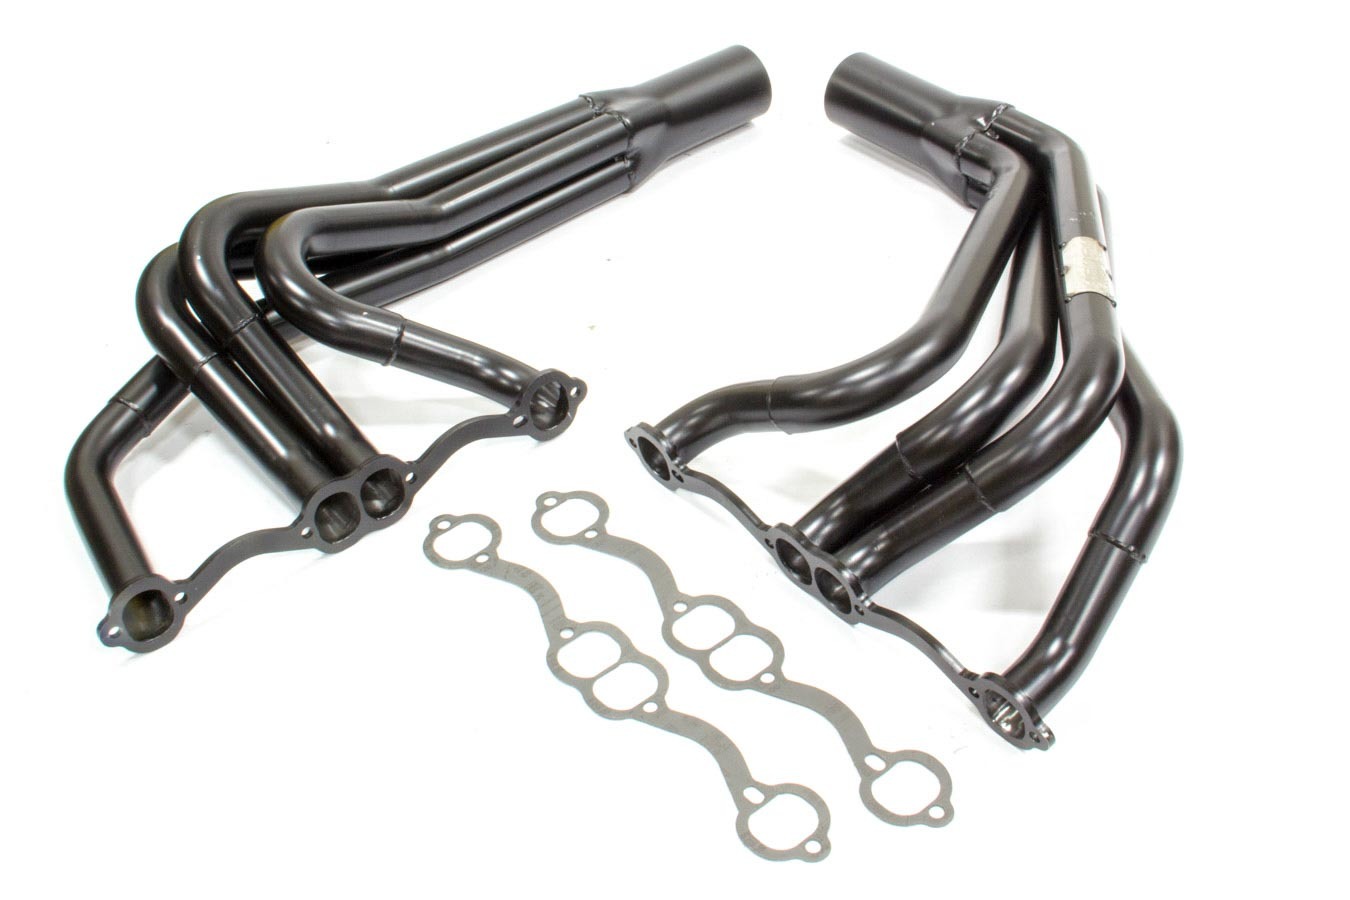 Headers - IMCA-UMP Modified - 1-3/4 to 1-7/8 in Primary - 3-1/2 in Collector - Steel - Black Paint - Small Block Chevy - Pair